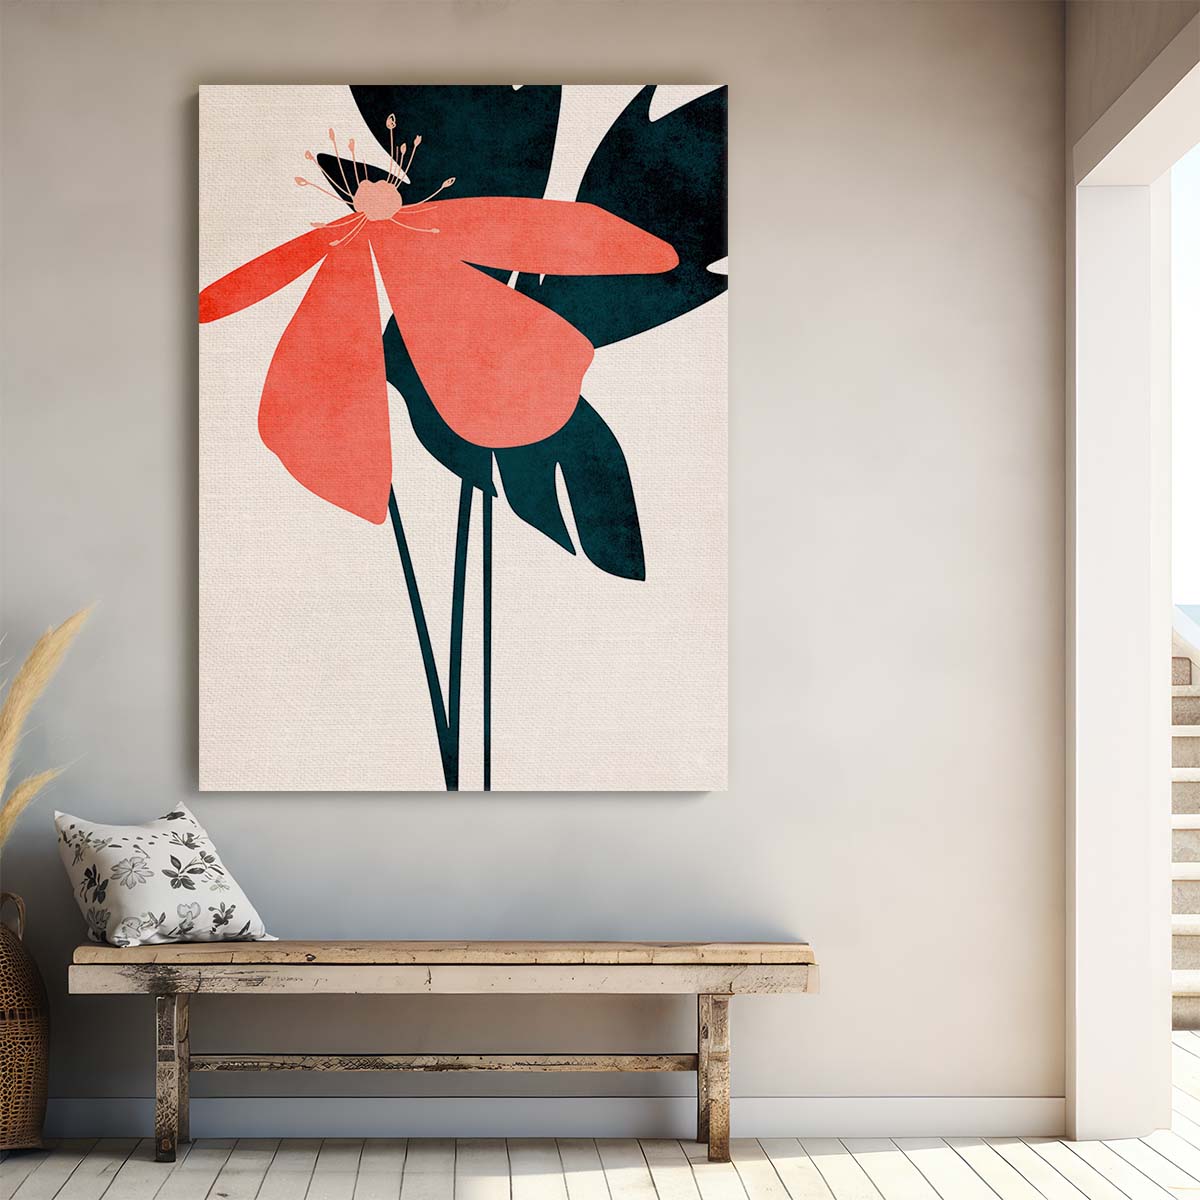 Red Flower Botanical Illustration on Bright White Background by Kubistika by Luxuriance Designs, made in USA